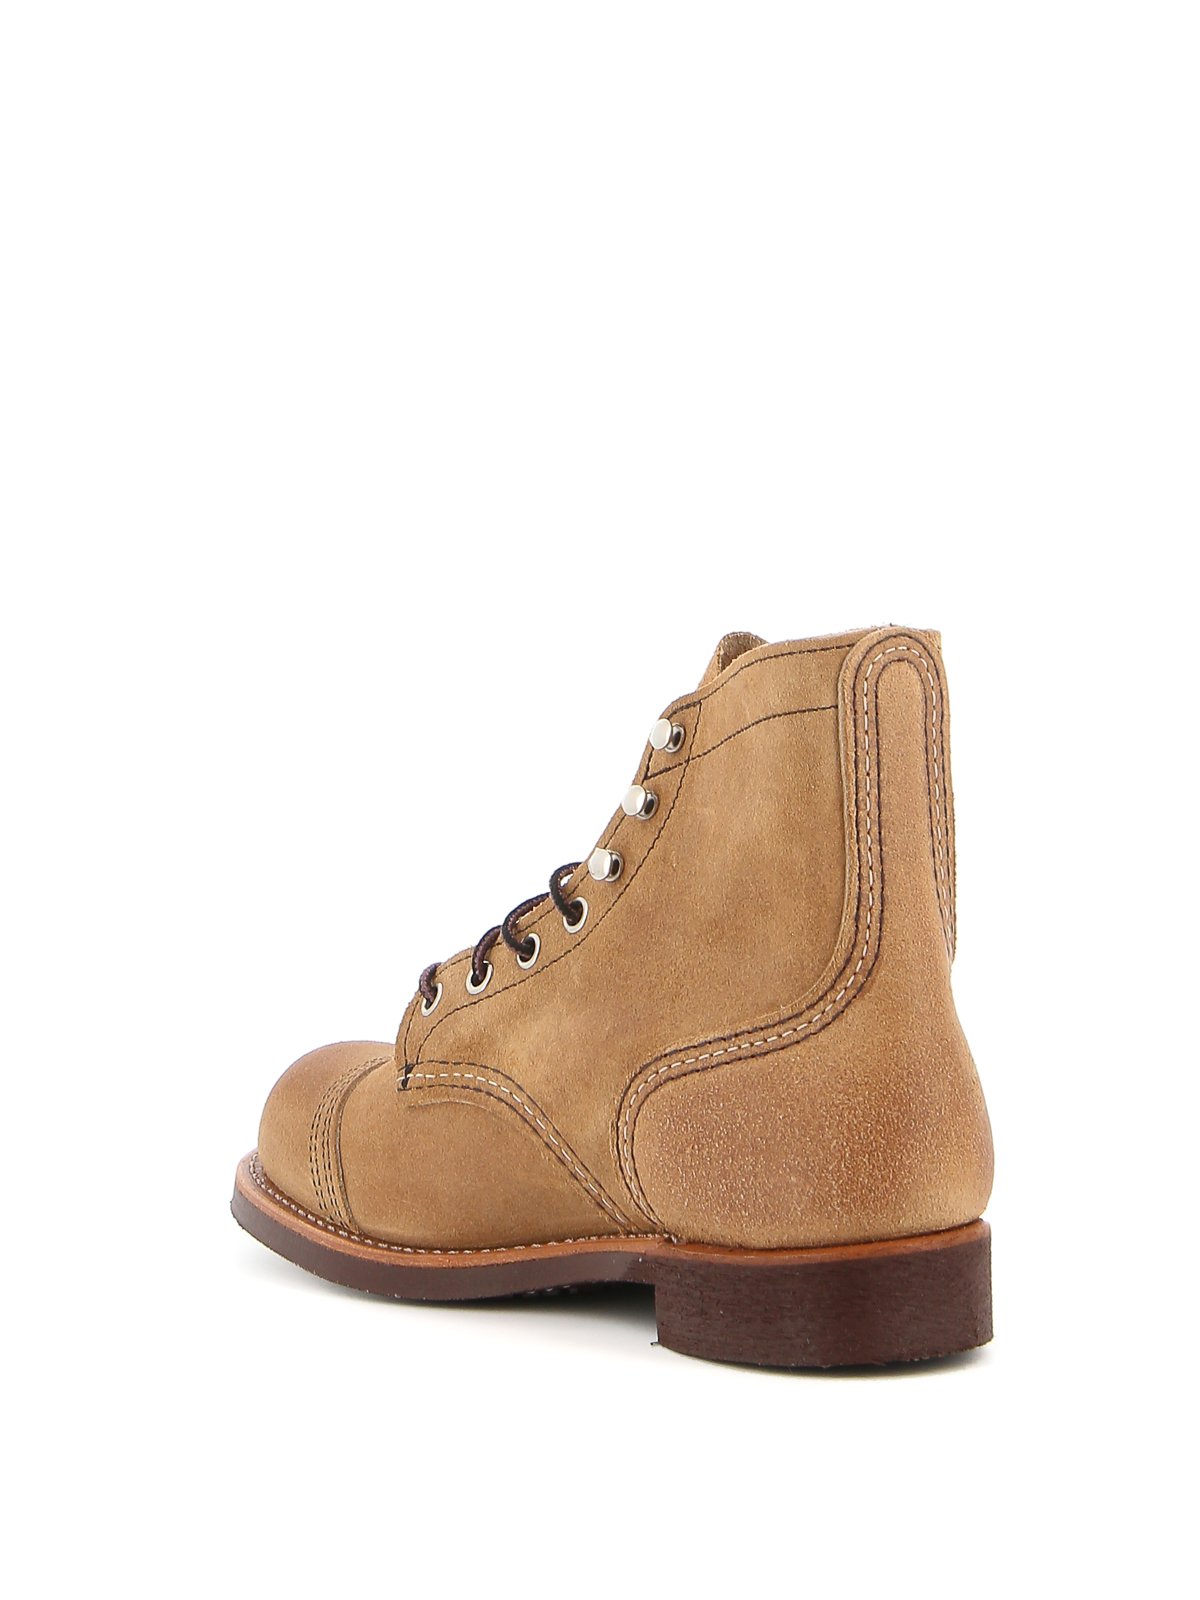 order red wing shoes online